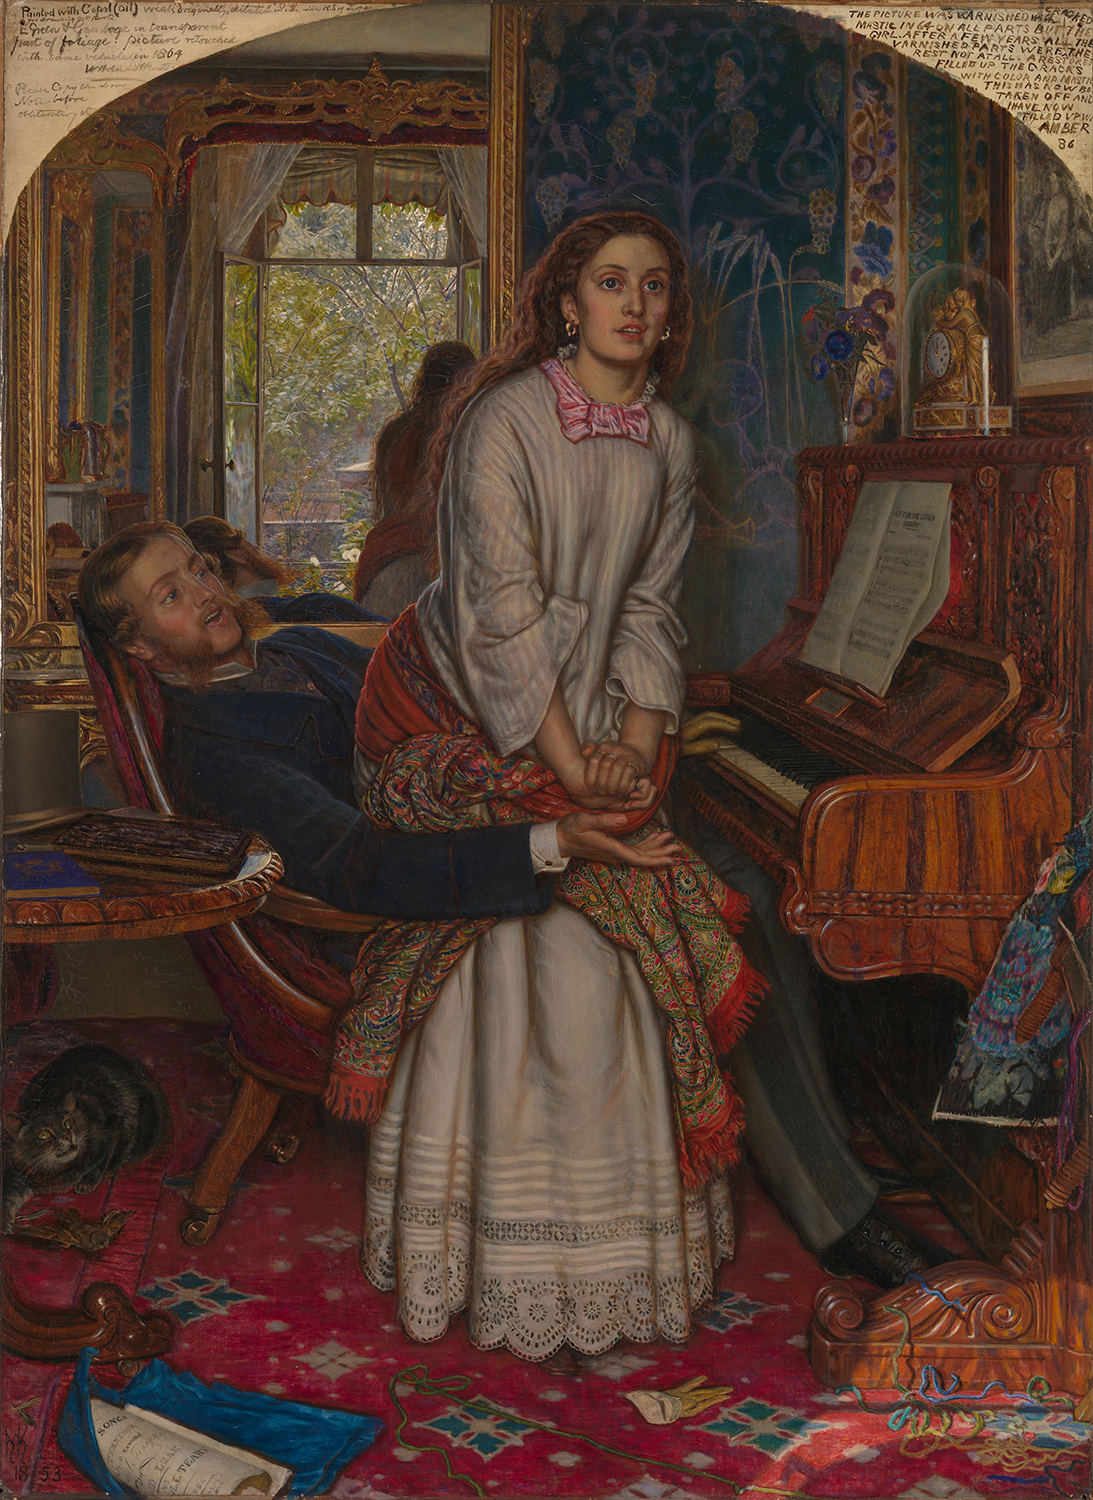 Both characters in this painting about a fallen woman, The Awakening Conscience by William Holman Hunt, have red hair